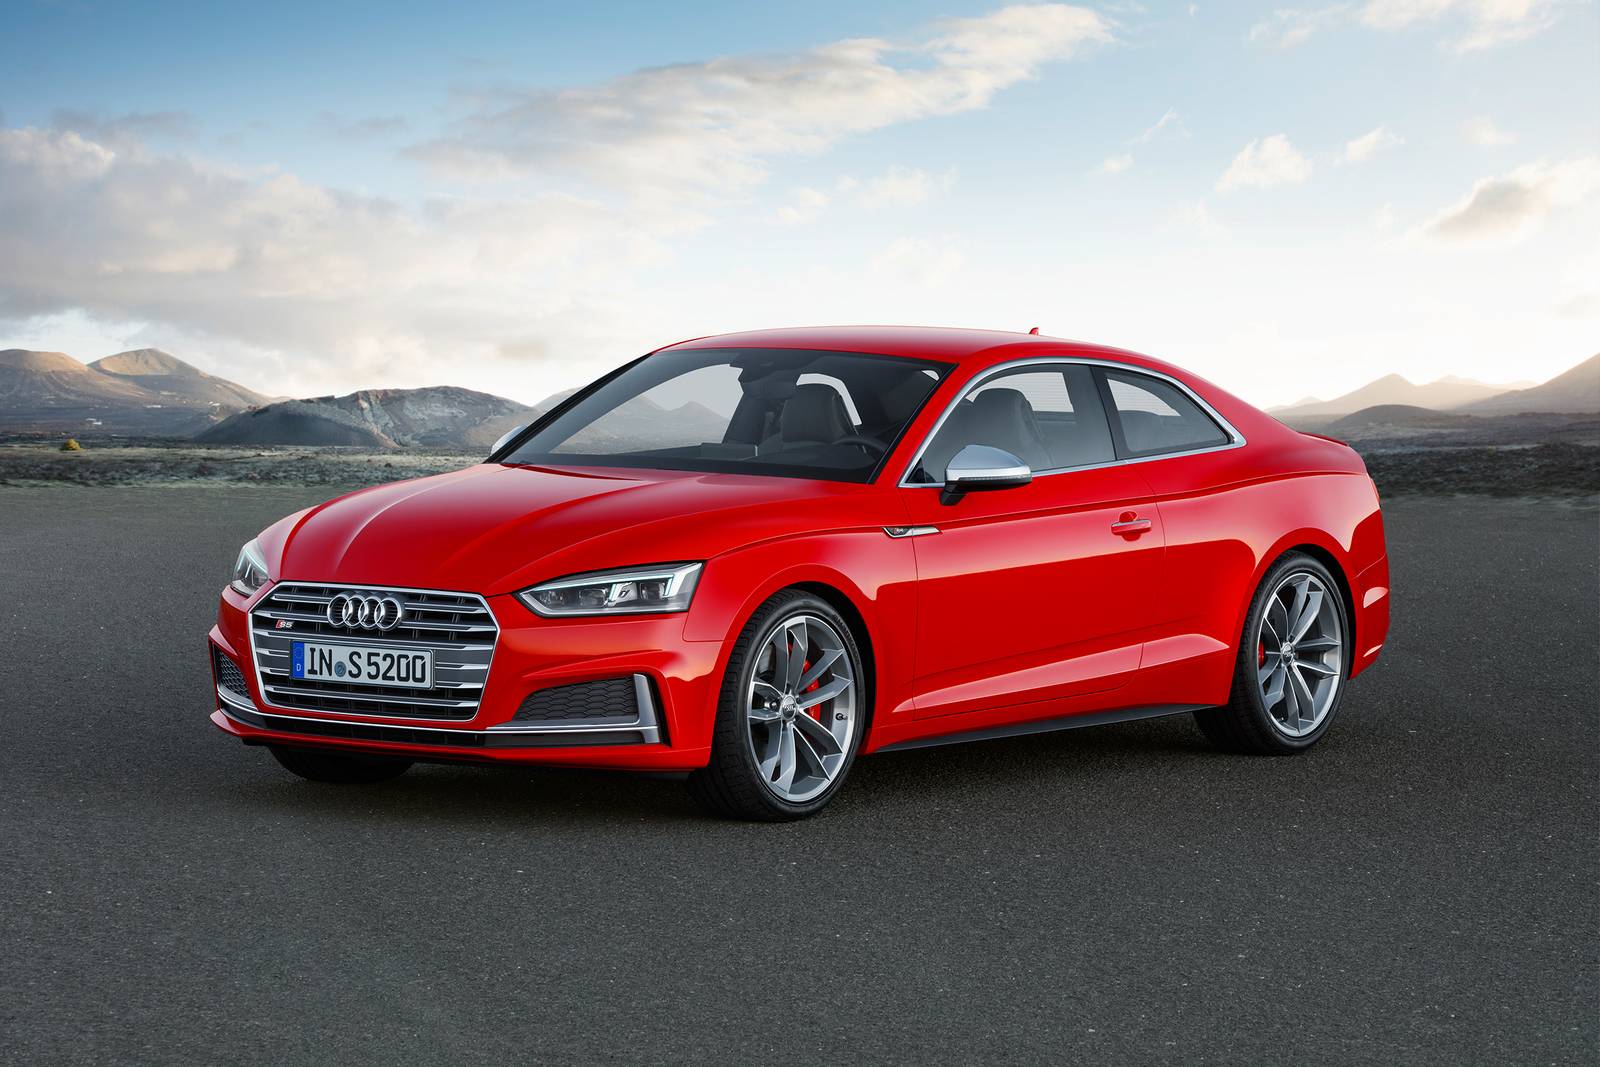 Used 2019 Audi S5 Coupe Review | Edmunds